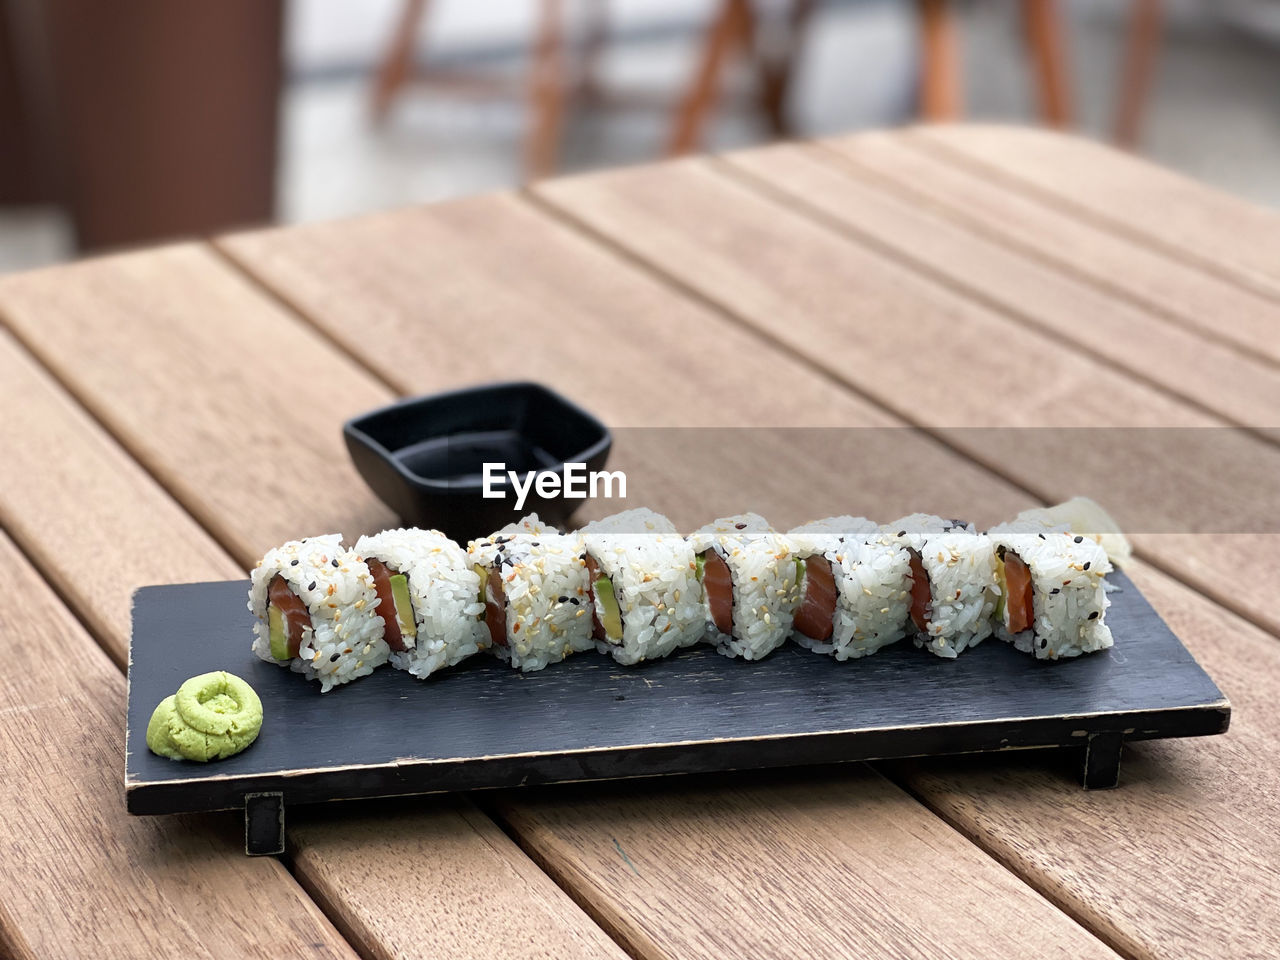 Sushi rolls on a plate in a restaurant